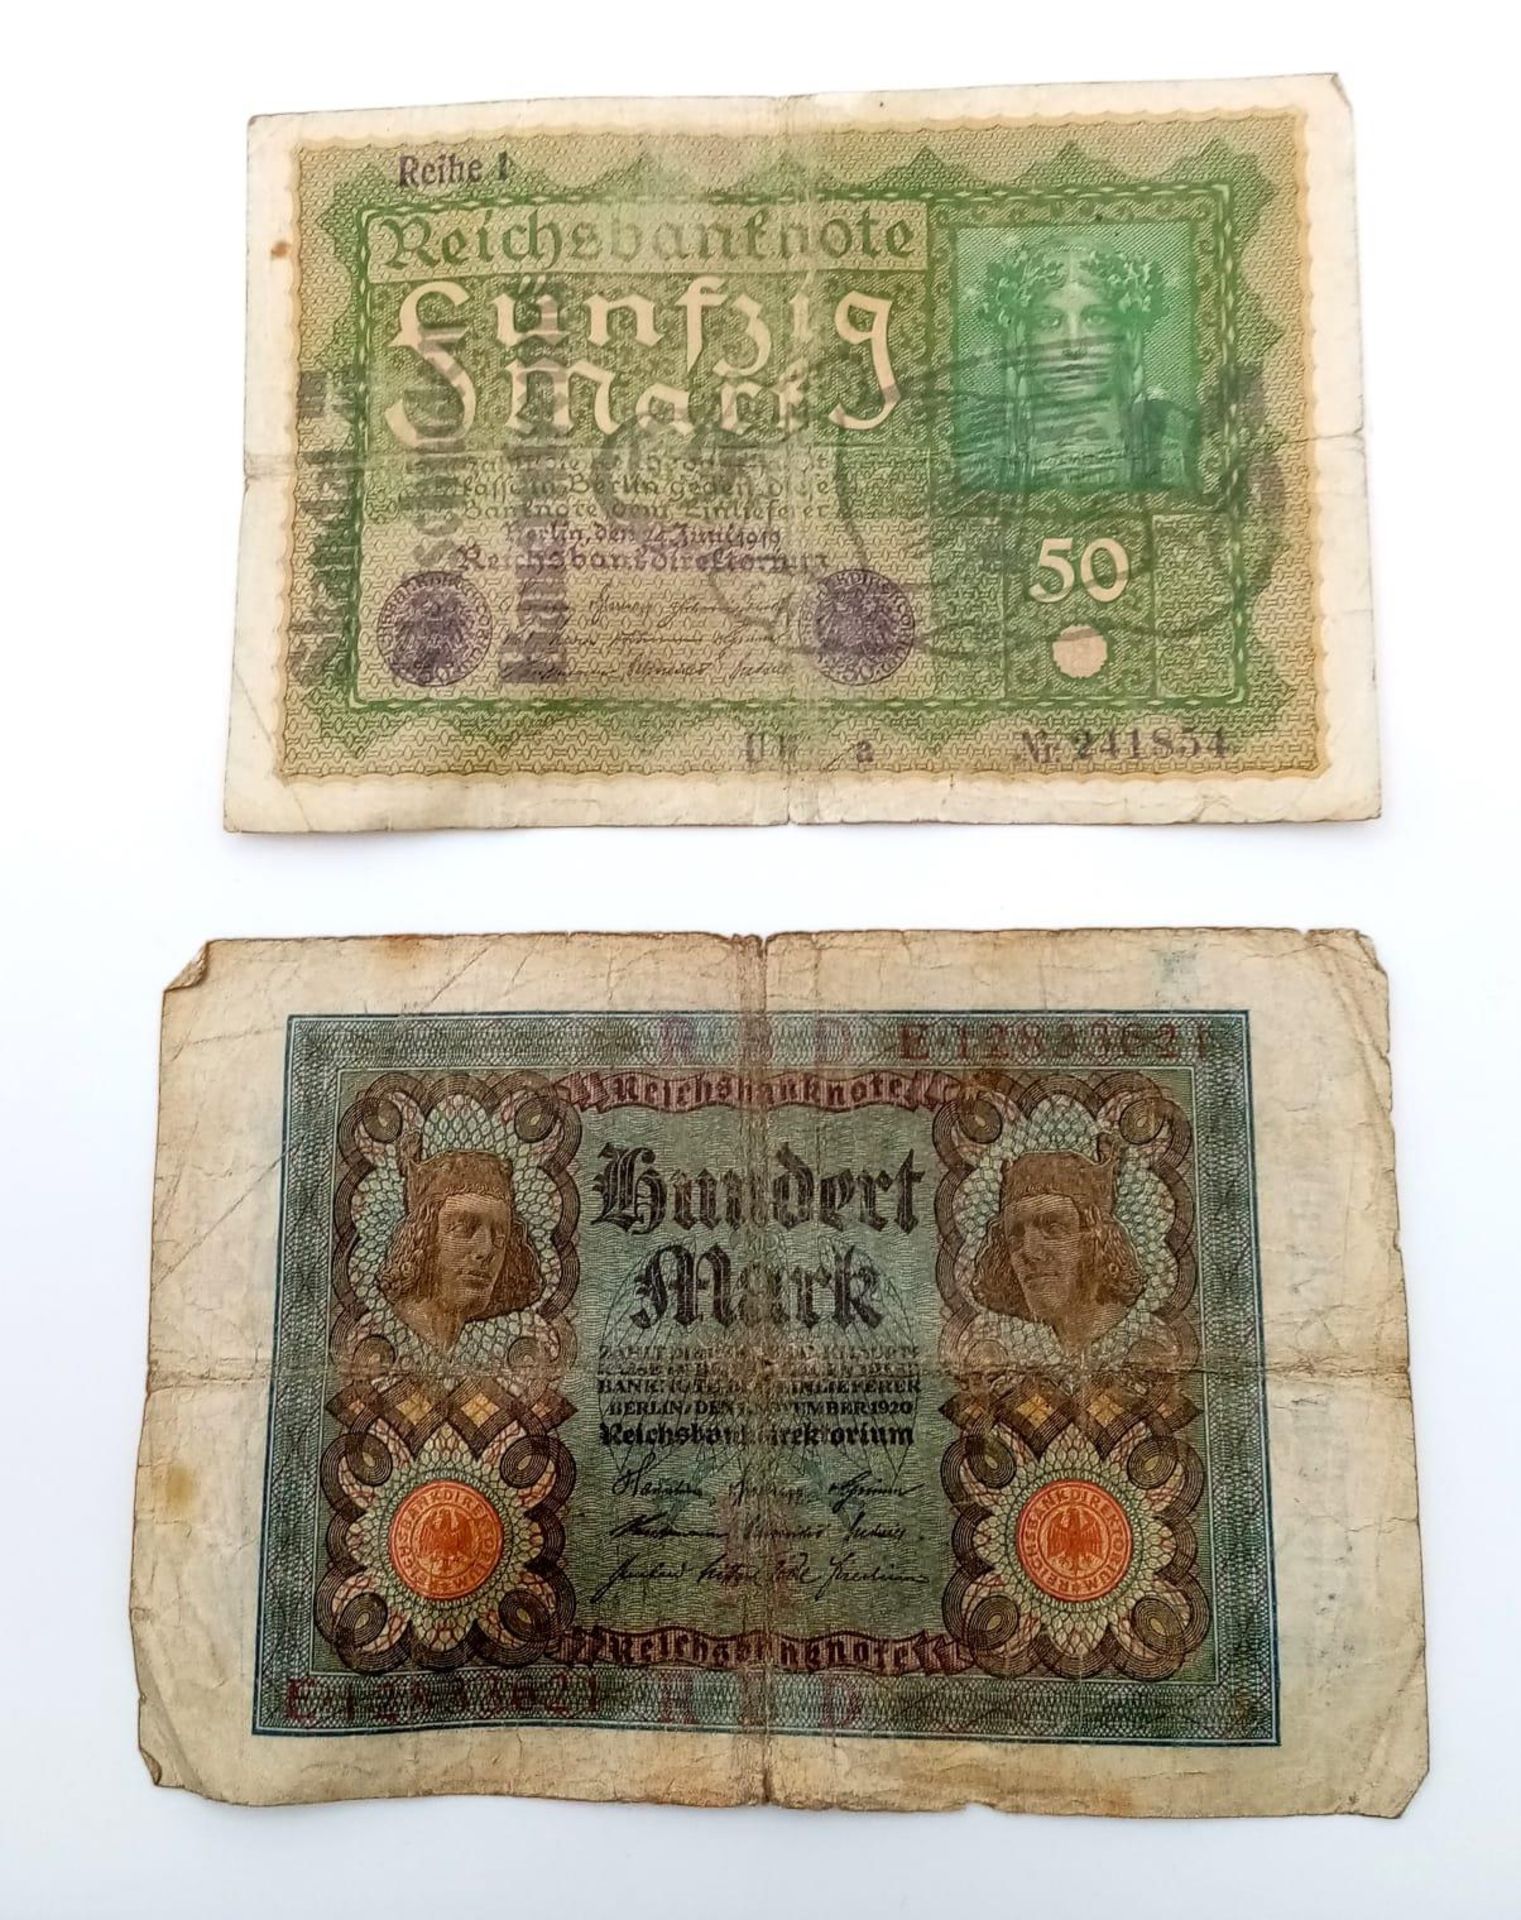 2 x 3rd Reich Anti Semitic Inflation Money Bank Notes. A real bank note that has been over printed